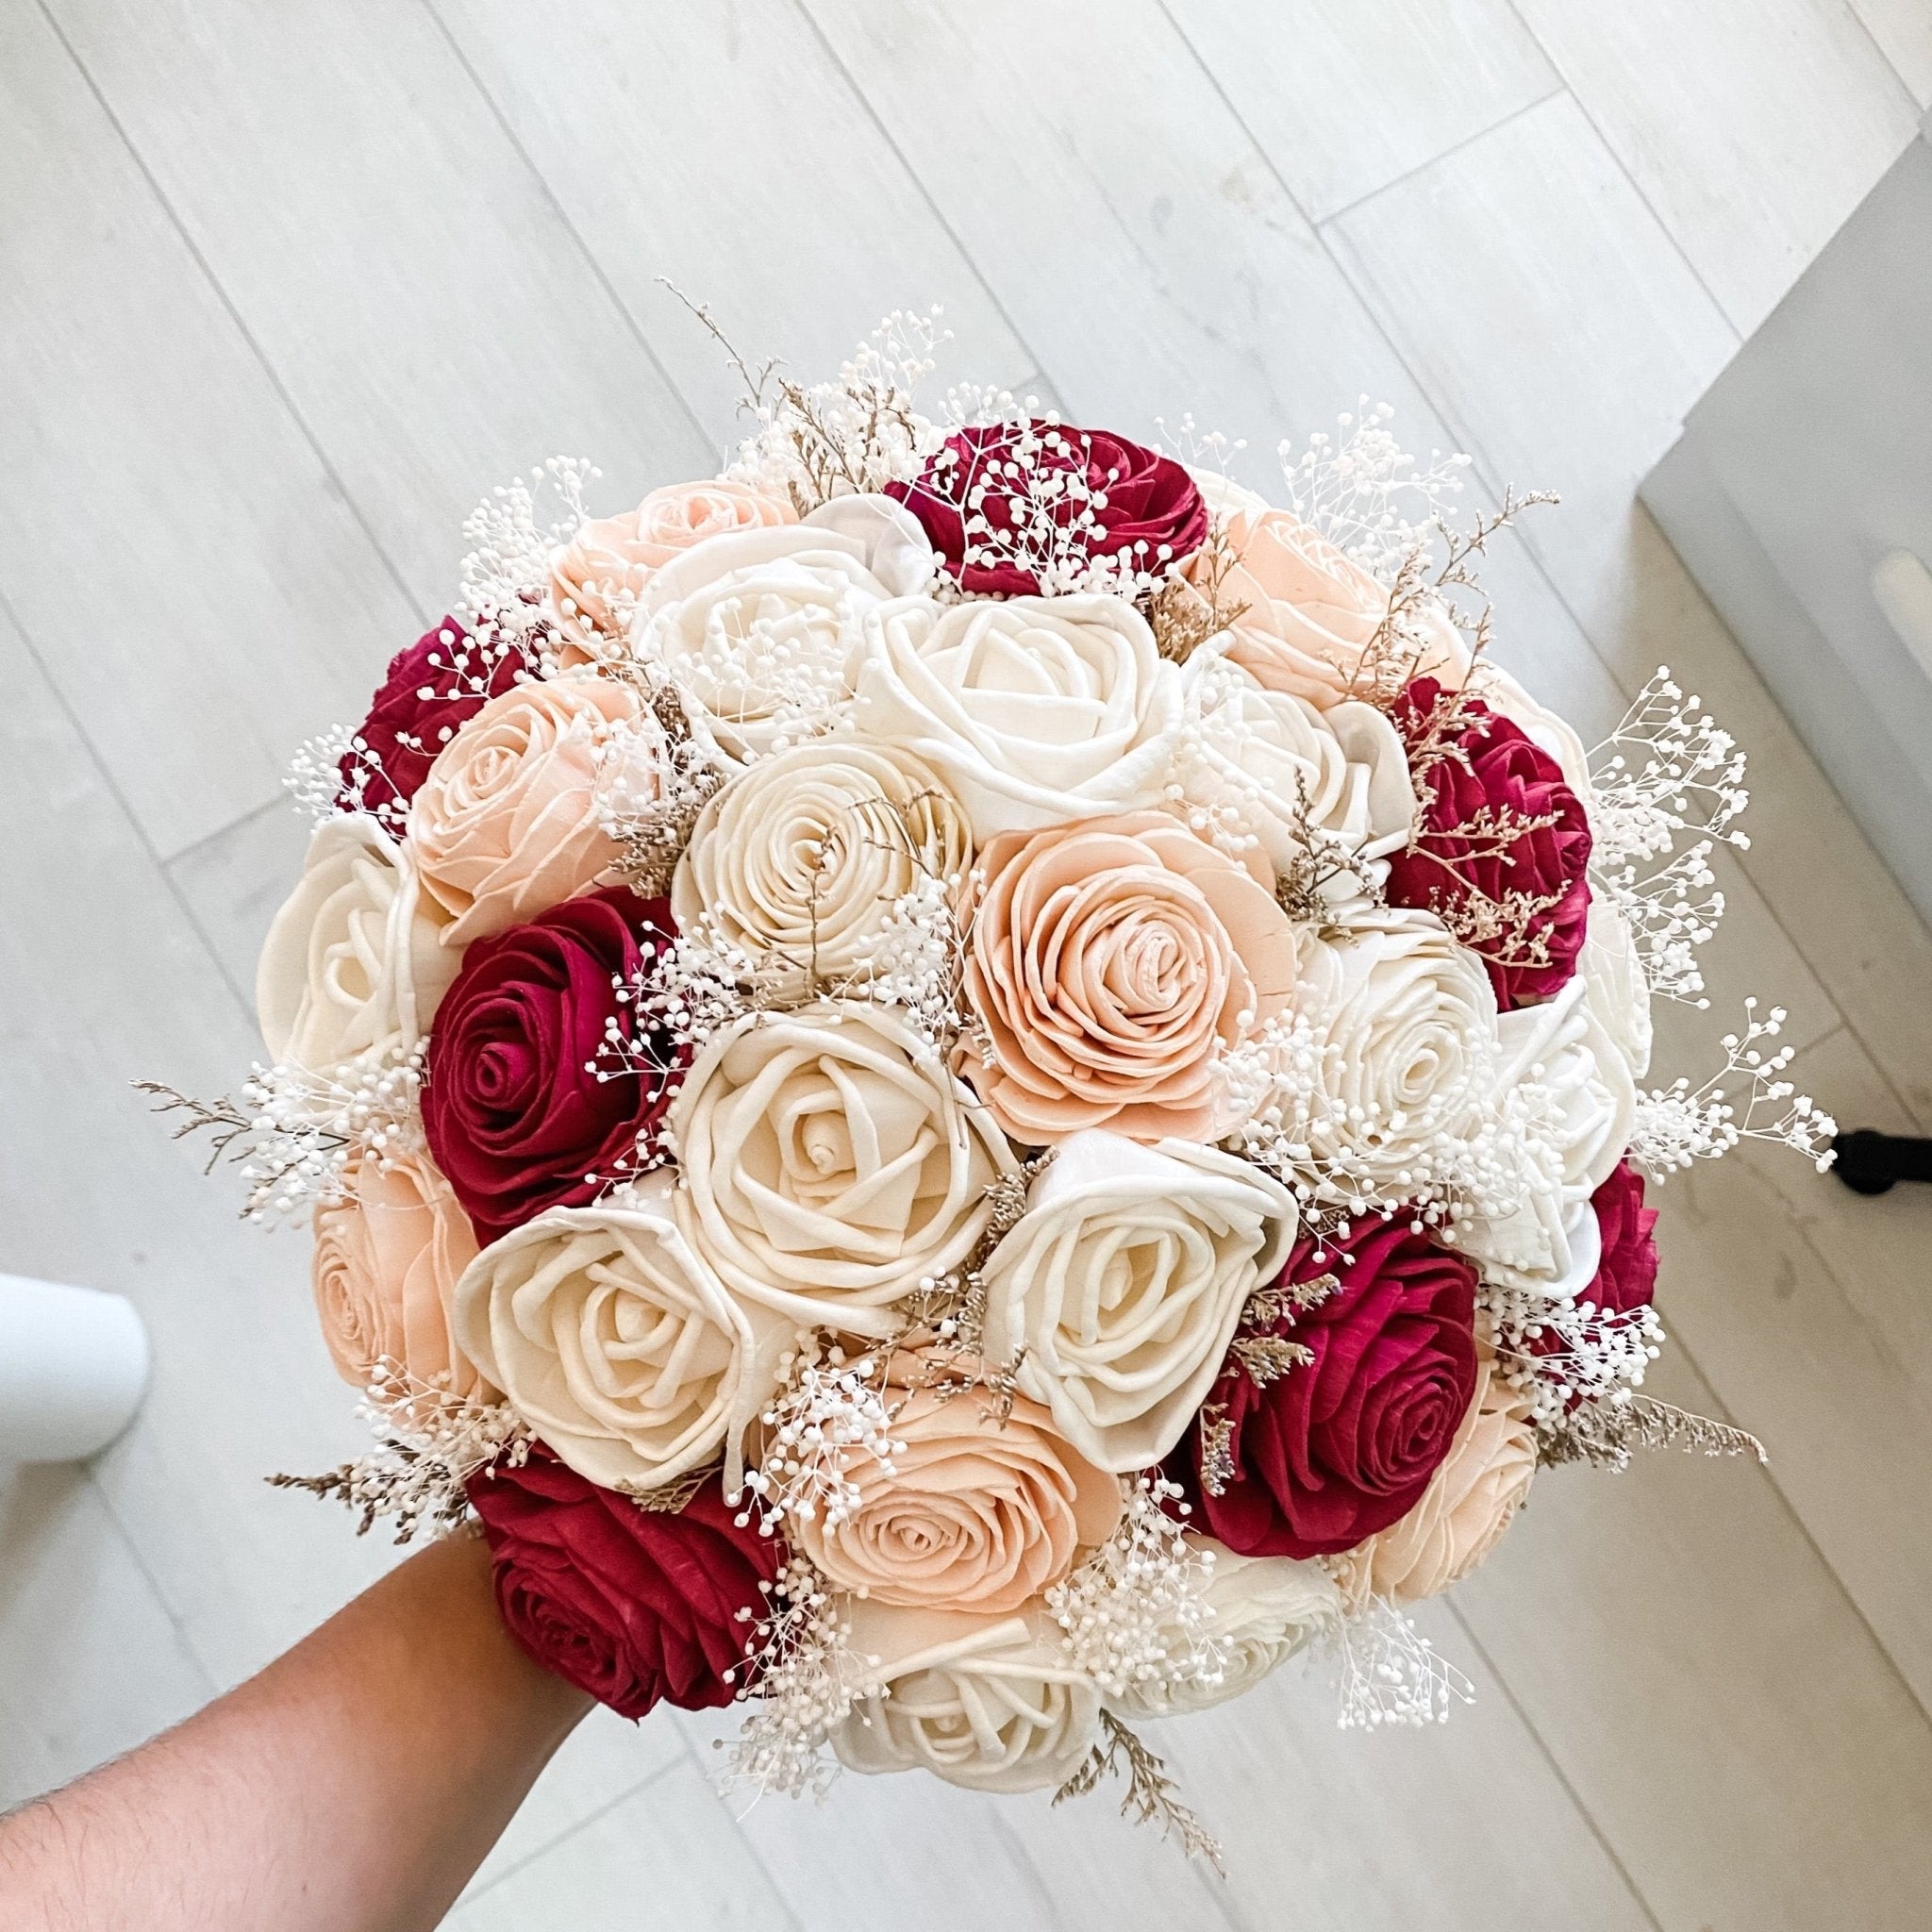 Romantic Rhapsody, Bridal Bouquet with Burgundy, Blush and Ivory Roses - PapiroExtra Large 12&quot; Bride